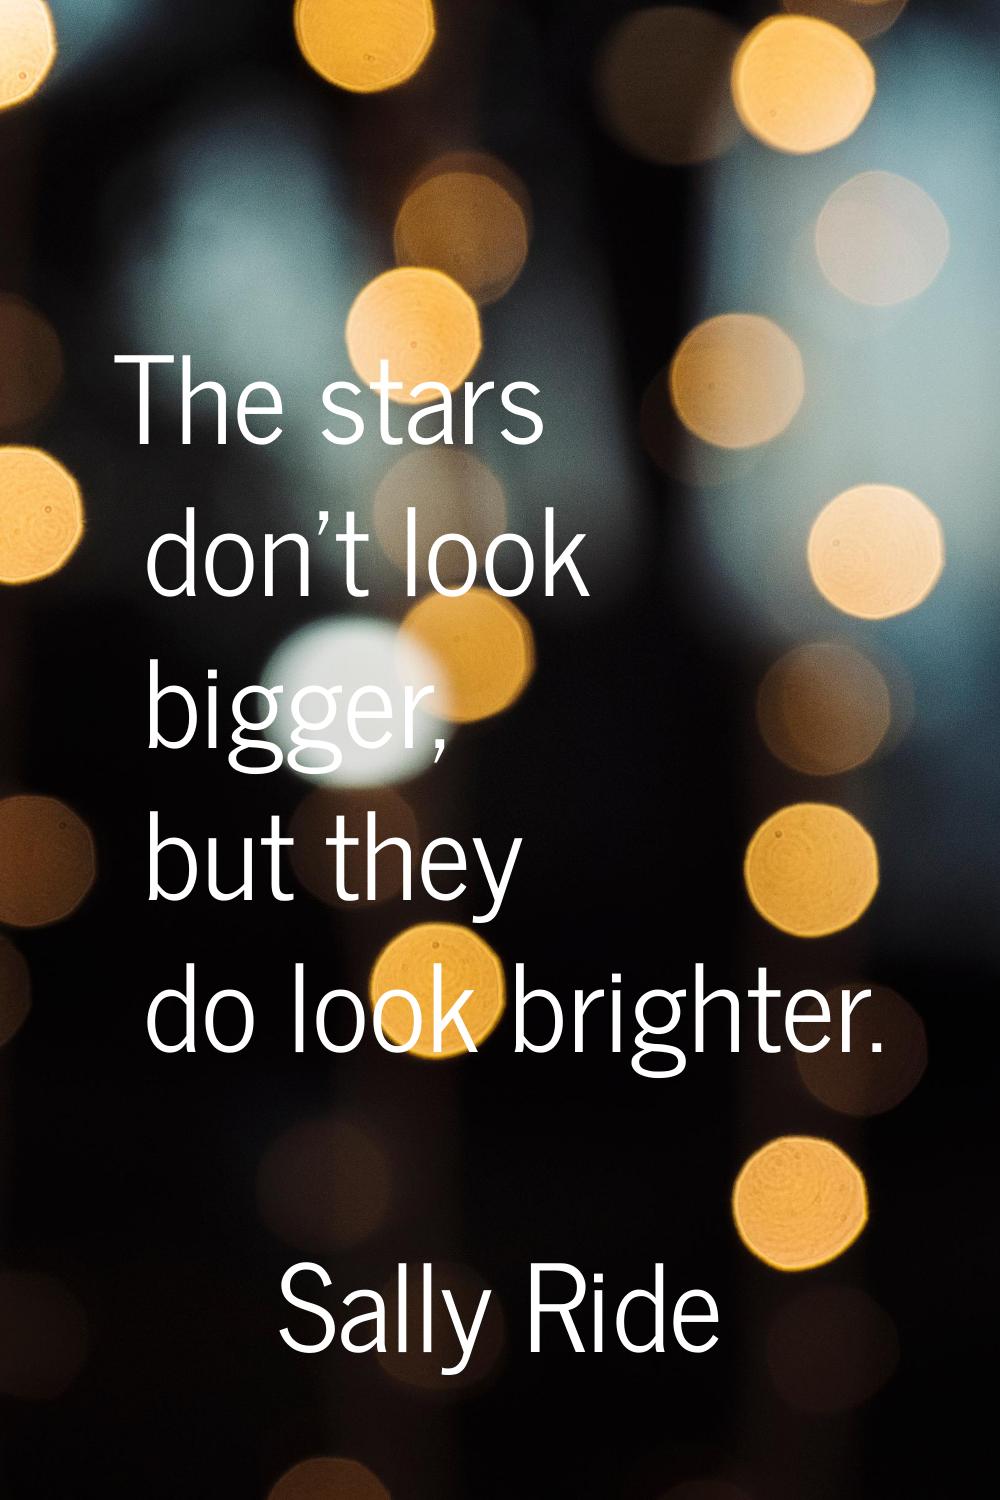 The stars don't look bigger, but they do look brighter.